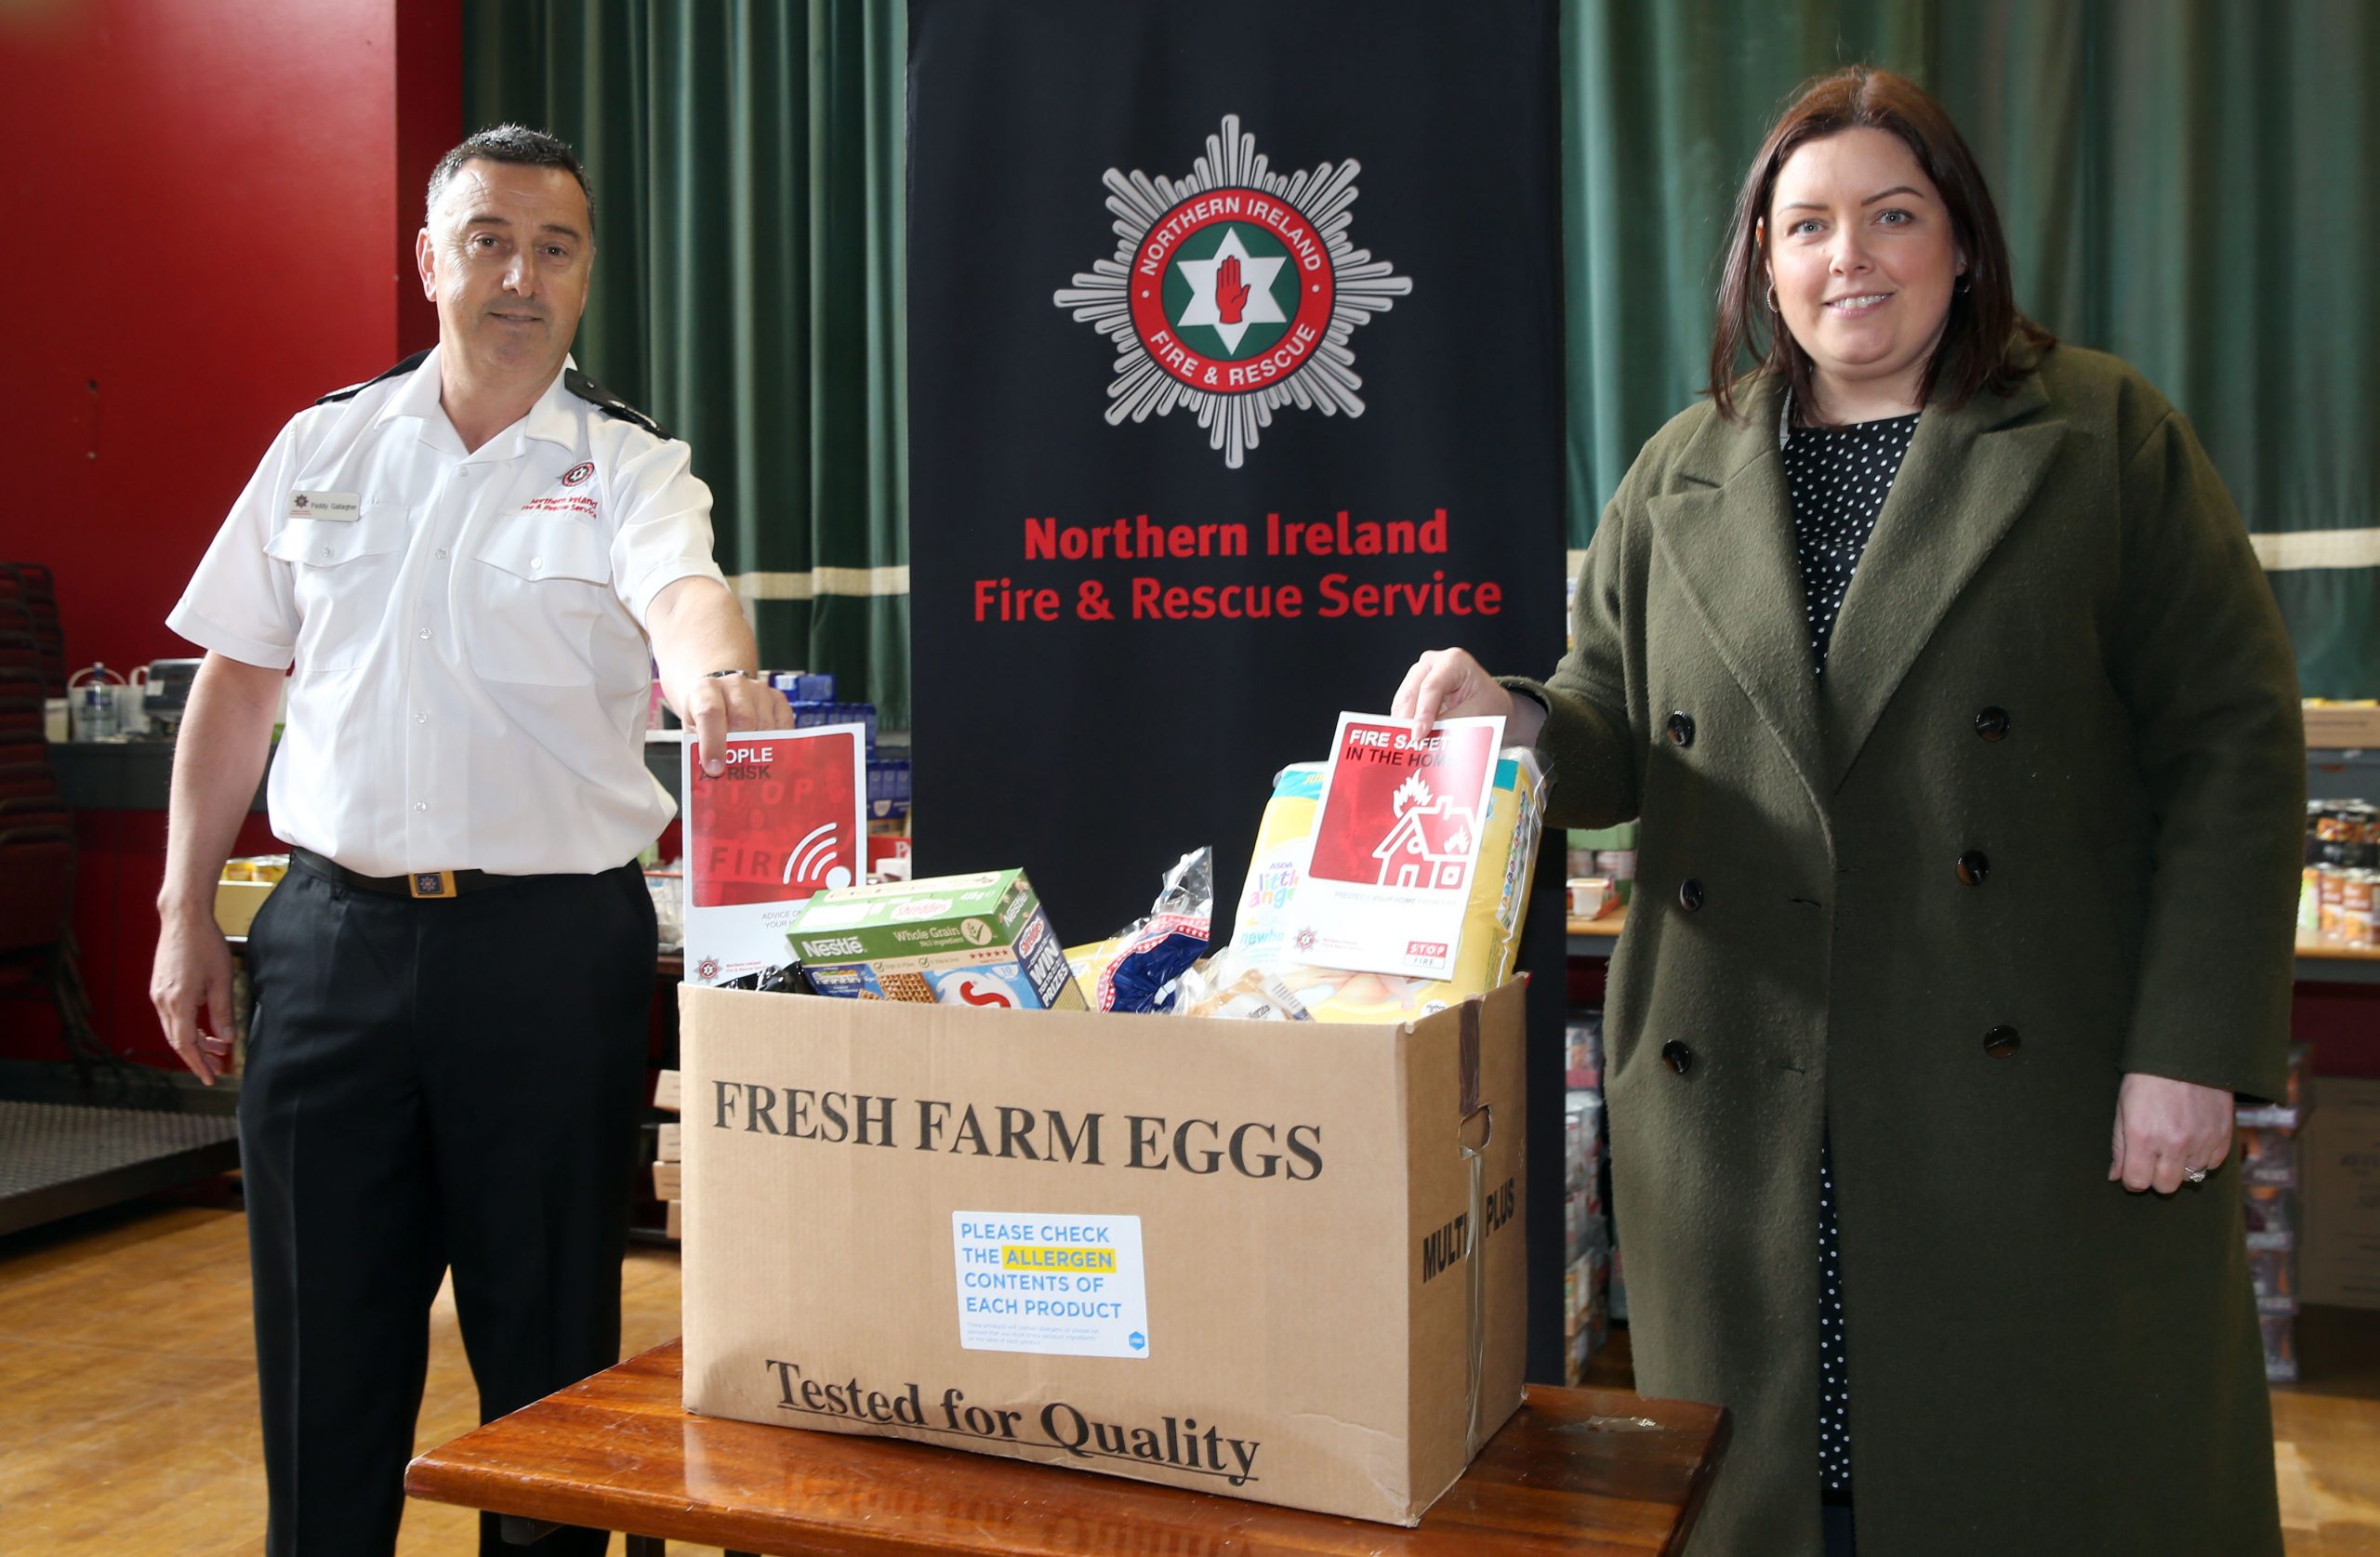 Paddy Gallagher & Deirdre Hargey beside food parcel